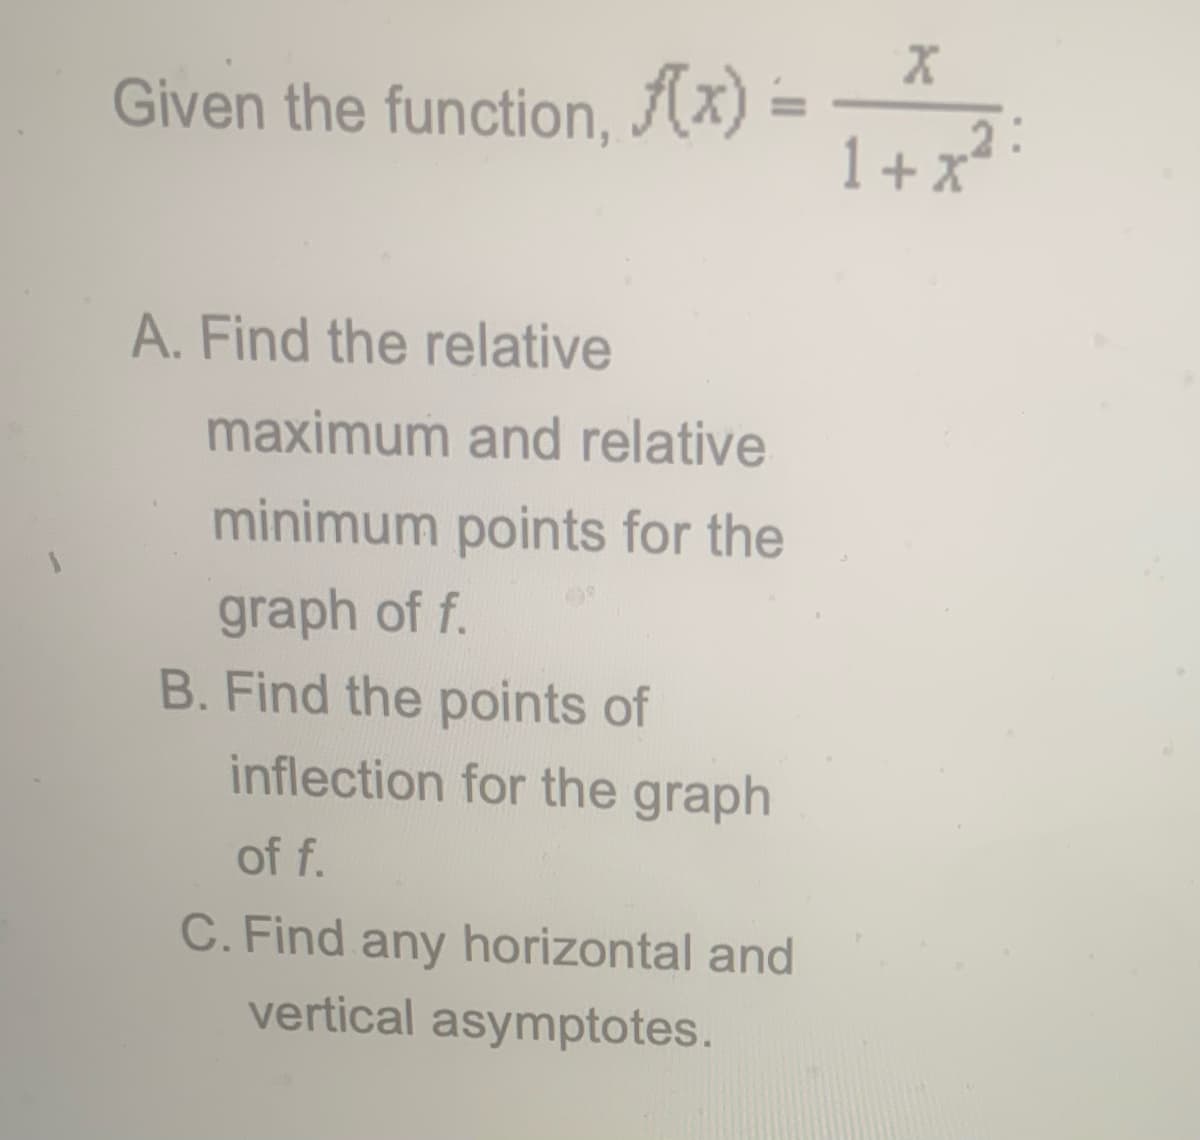 Given the function, (x) =
1+ x?
A. Find the relative
maximum and relative
minimum points for the
graph of f.
B. Find the points of
inflection for the graph
of f.
C. Find any horizontal and
vertical asymptotes.
